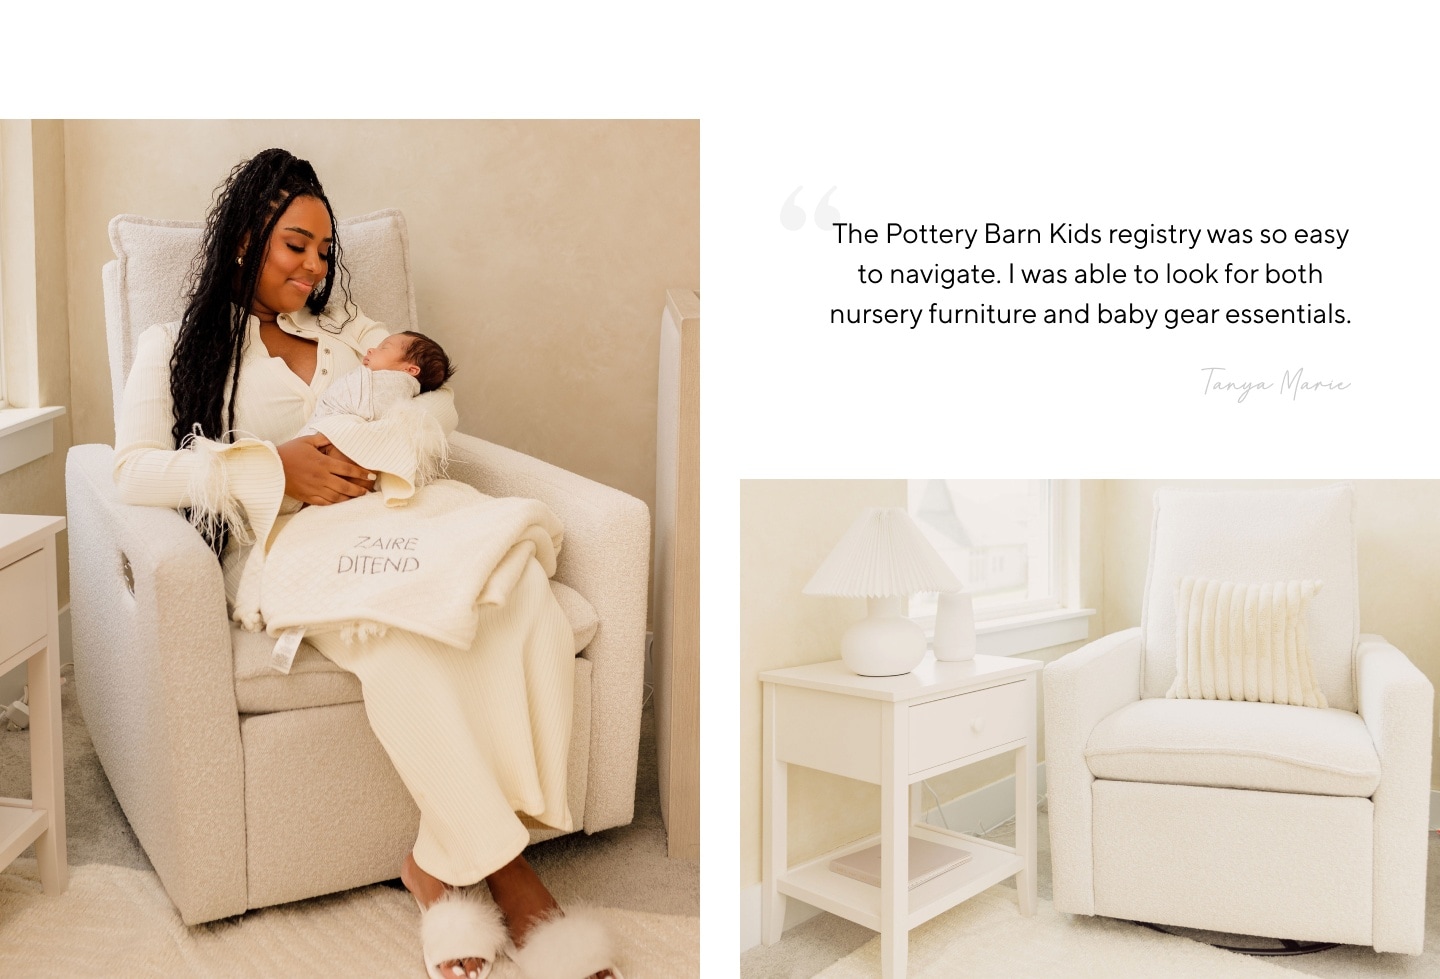 The Pottery Barn Kids registry was so easy to navigate. I was able to look for both nursery furniture and baby gear essentials.